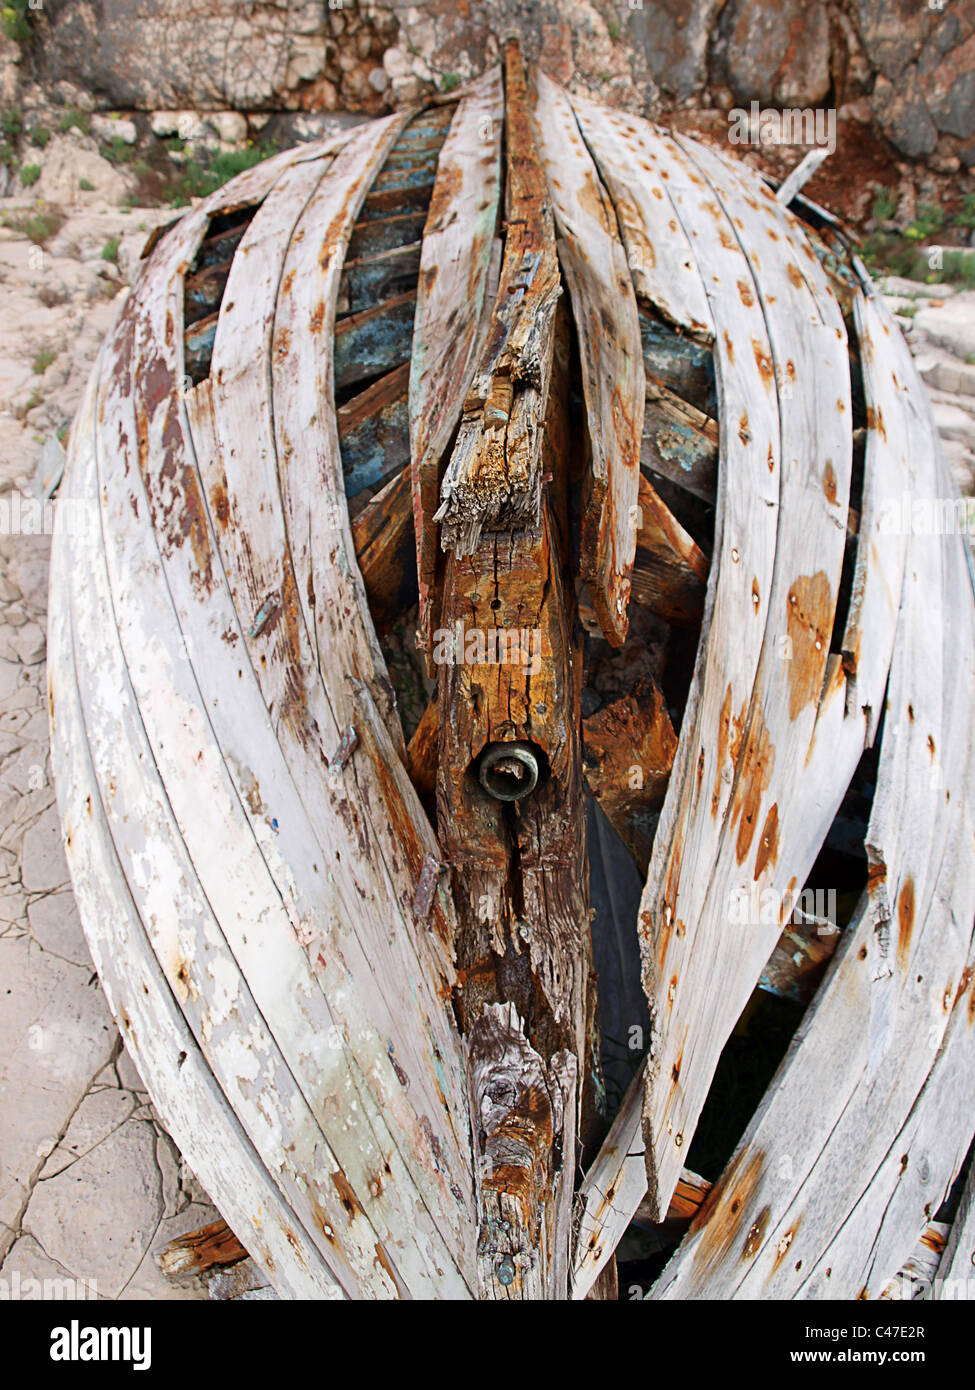 The wrecked wooden hull of a boat on the beach. Stock Photo